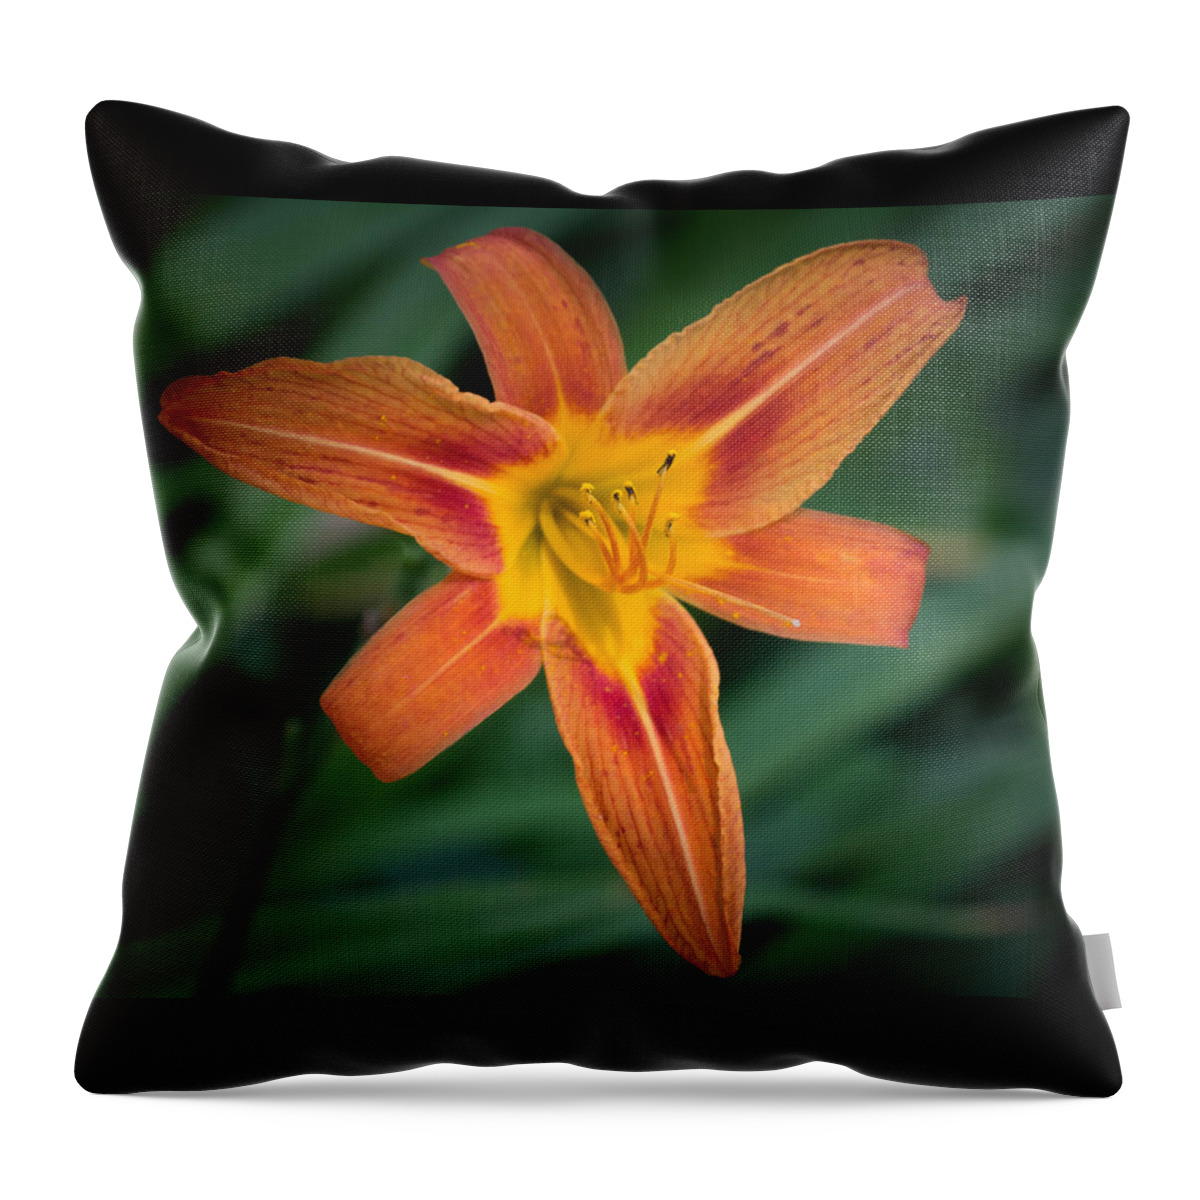 Tiger Lily In Full Bloom Throw Pillow featuring the photograph July Tiger Lily by Kenneth Cole